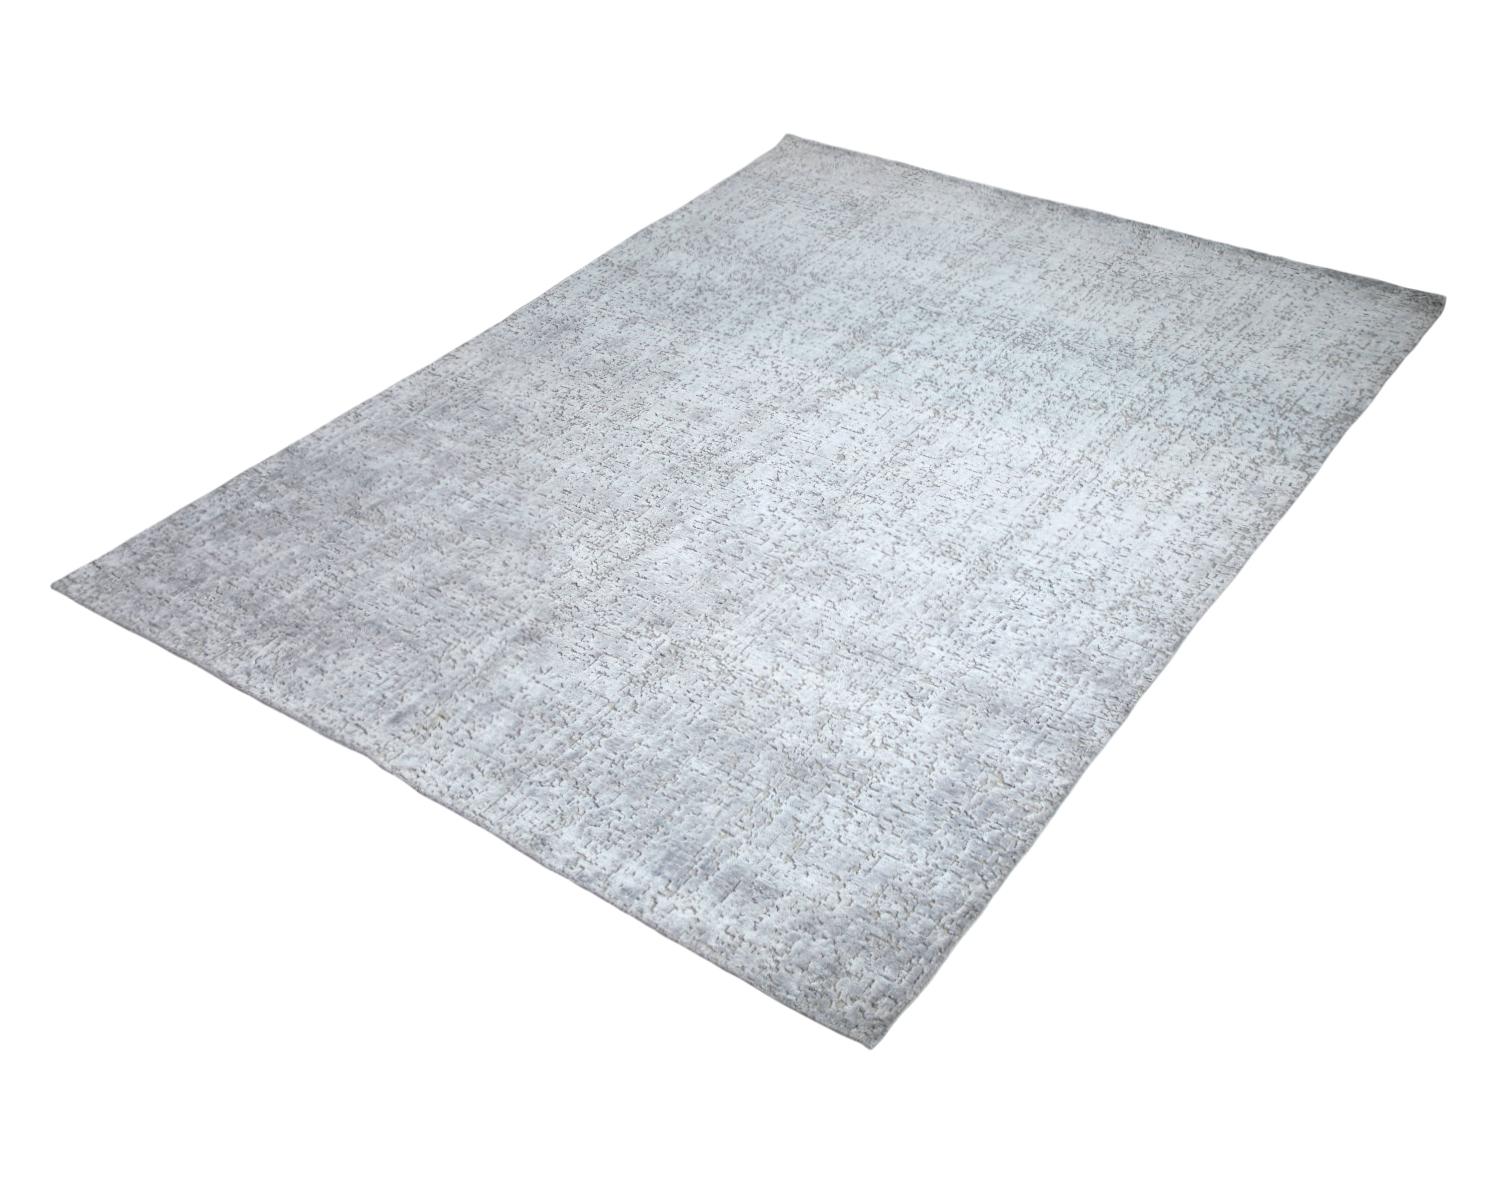 One-of-a-Kind Transitional Wool Viscose Blend Handmade Area Rug, Mist, 7'9 x 9'9 1